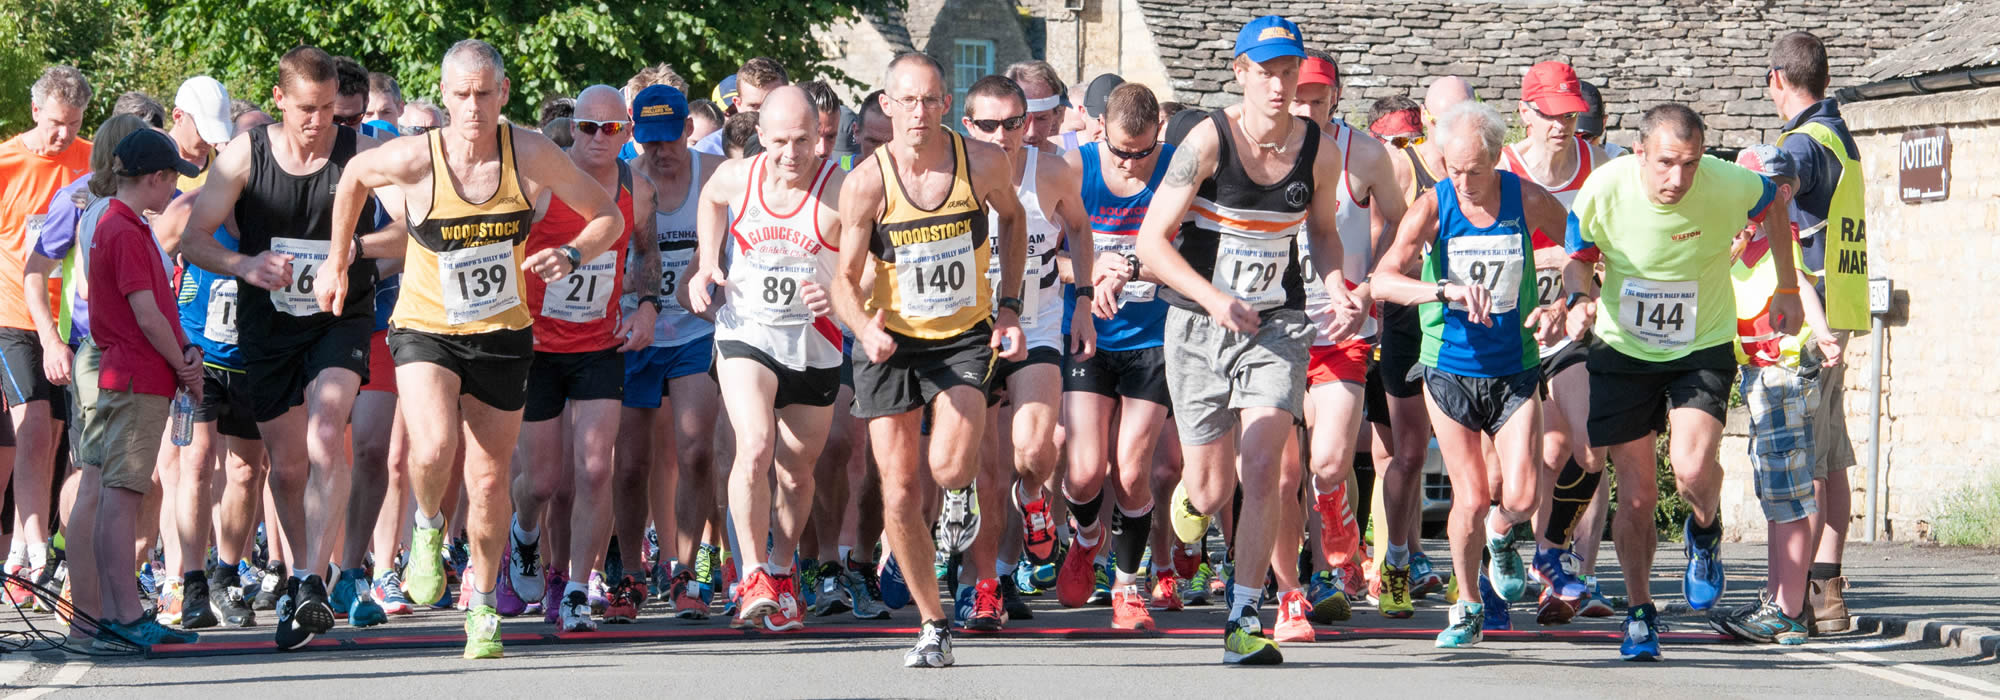 Start of the 2017 Humph's Hilly Half